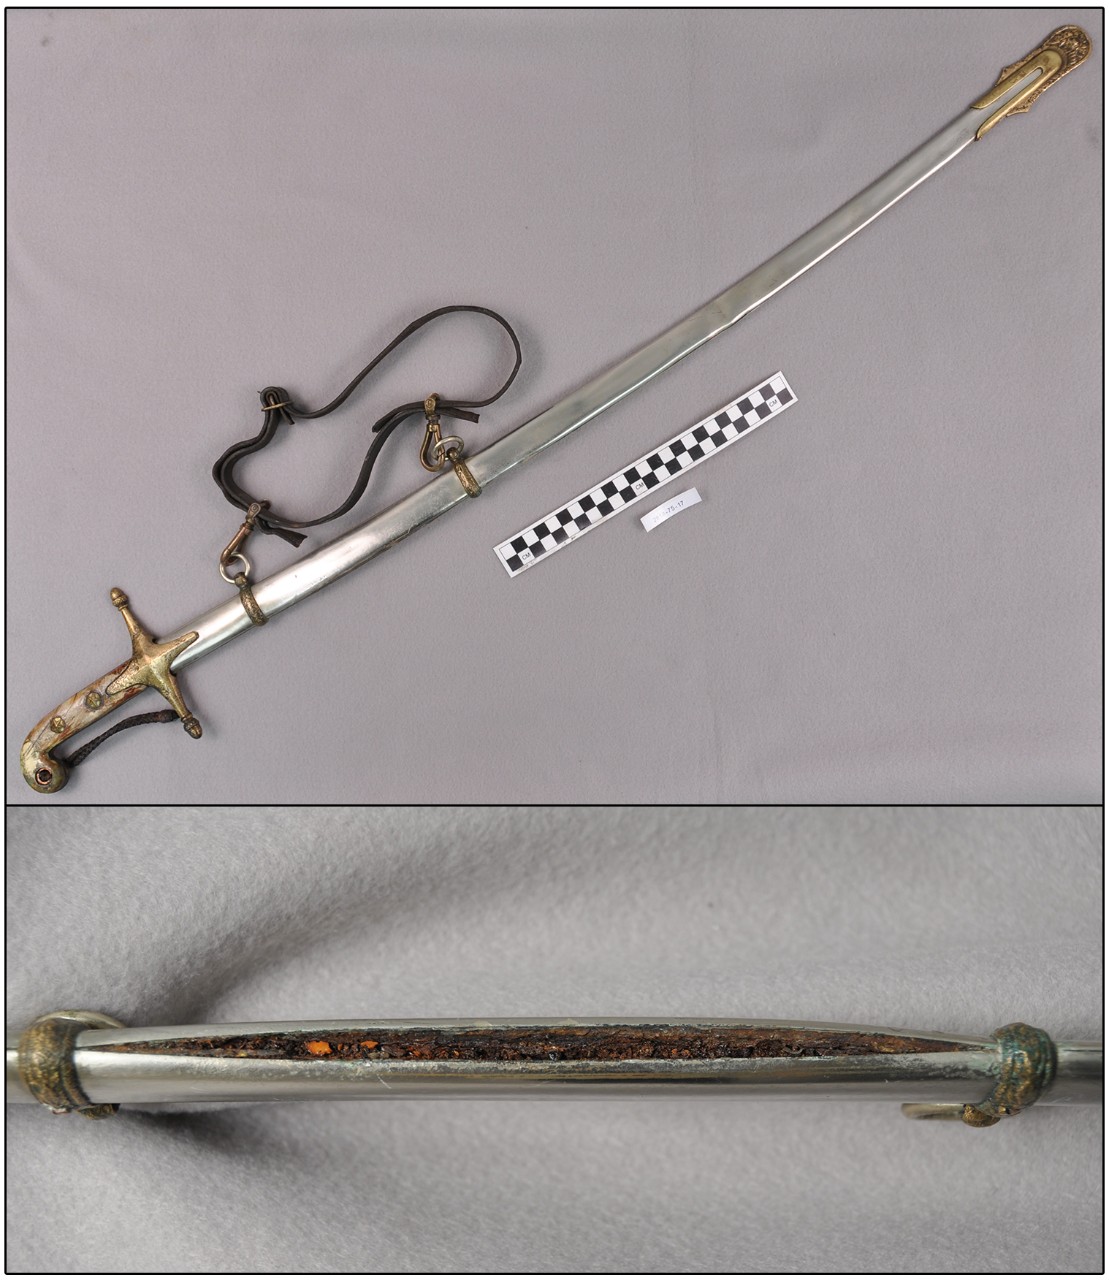 Two color photos of a sword. The top image is the complete sword with a sheath covering the blade and a leather strap attached. The bottom is a close up of a crack in the sheath showing the corroded blade, which is orange and red in color and fla...